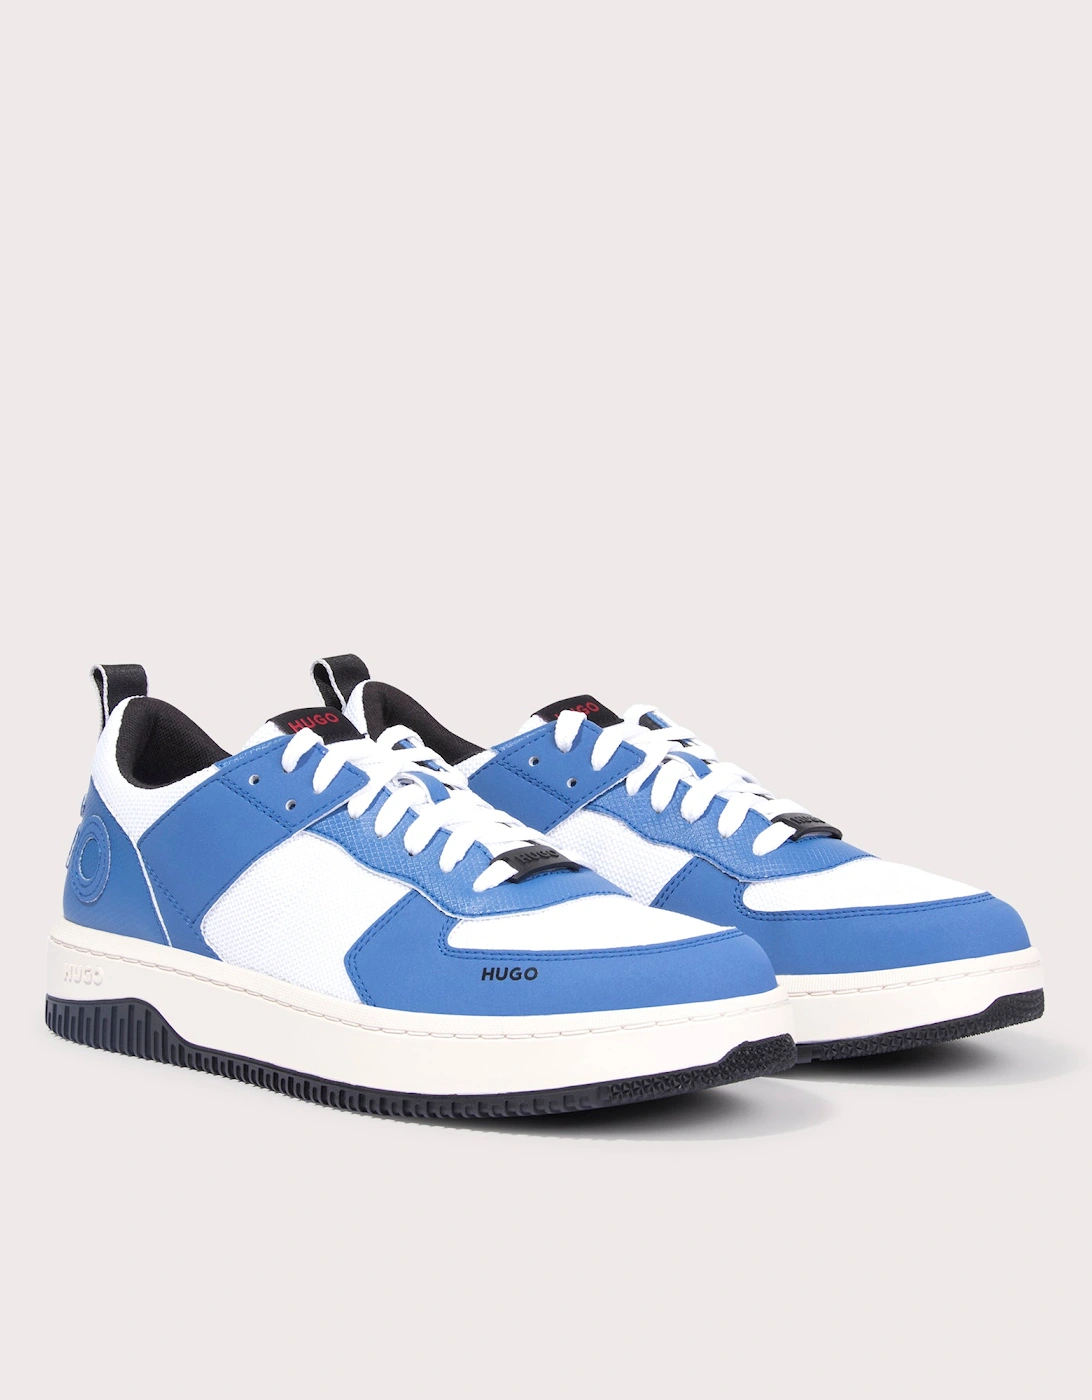 Mixed Material Kilian Tenn Pume Low Top Trainers